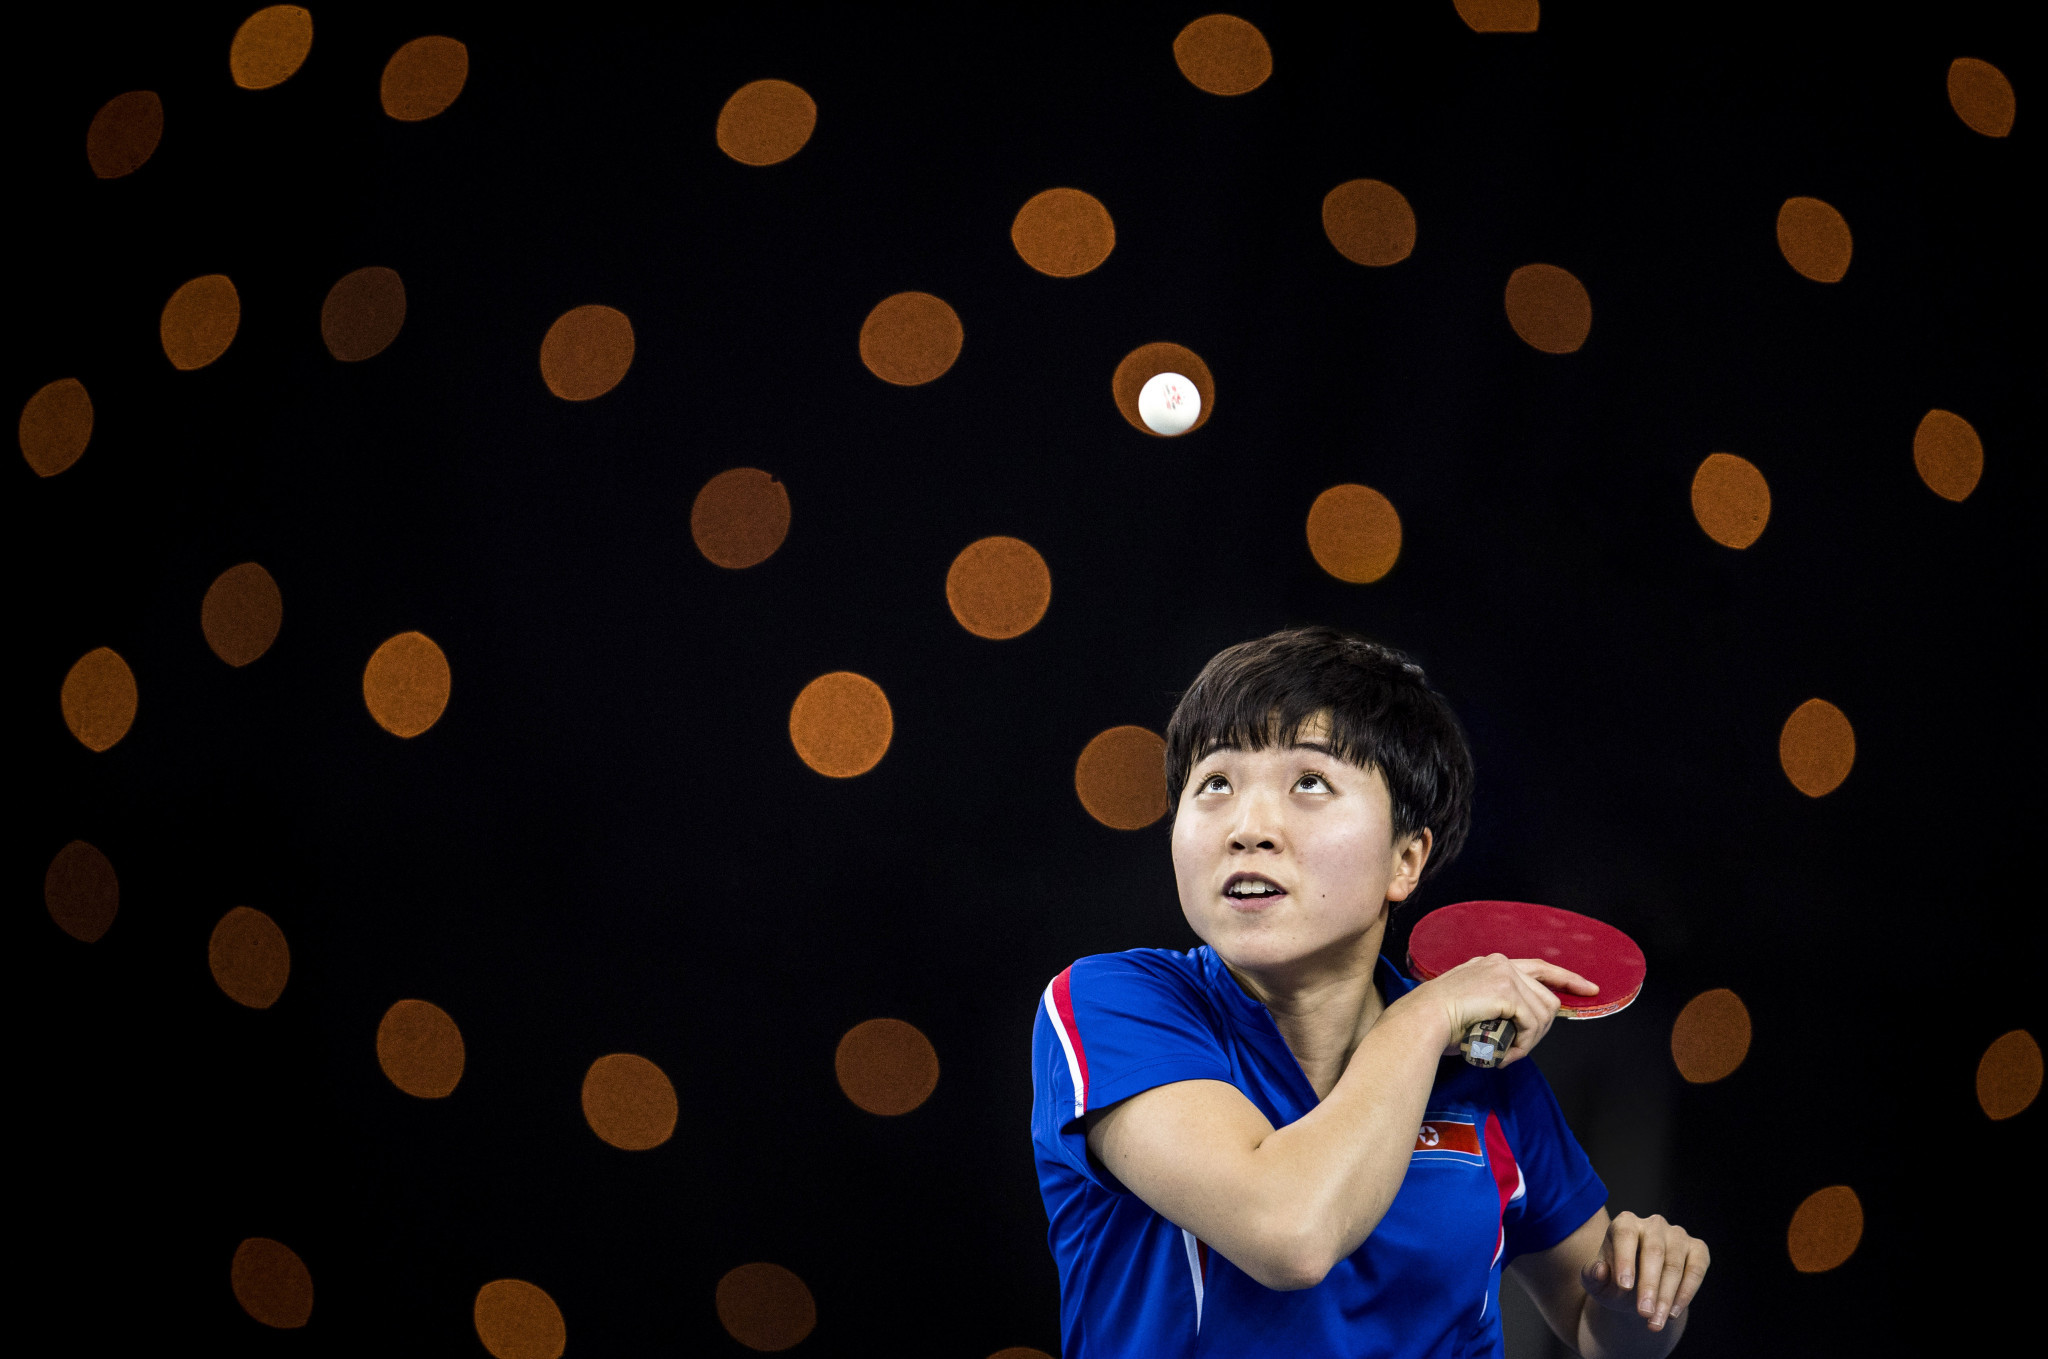 North Korea to face South Korea in women's quarter-finals at World Team Table Tennis Championships